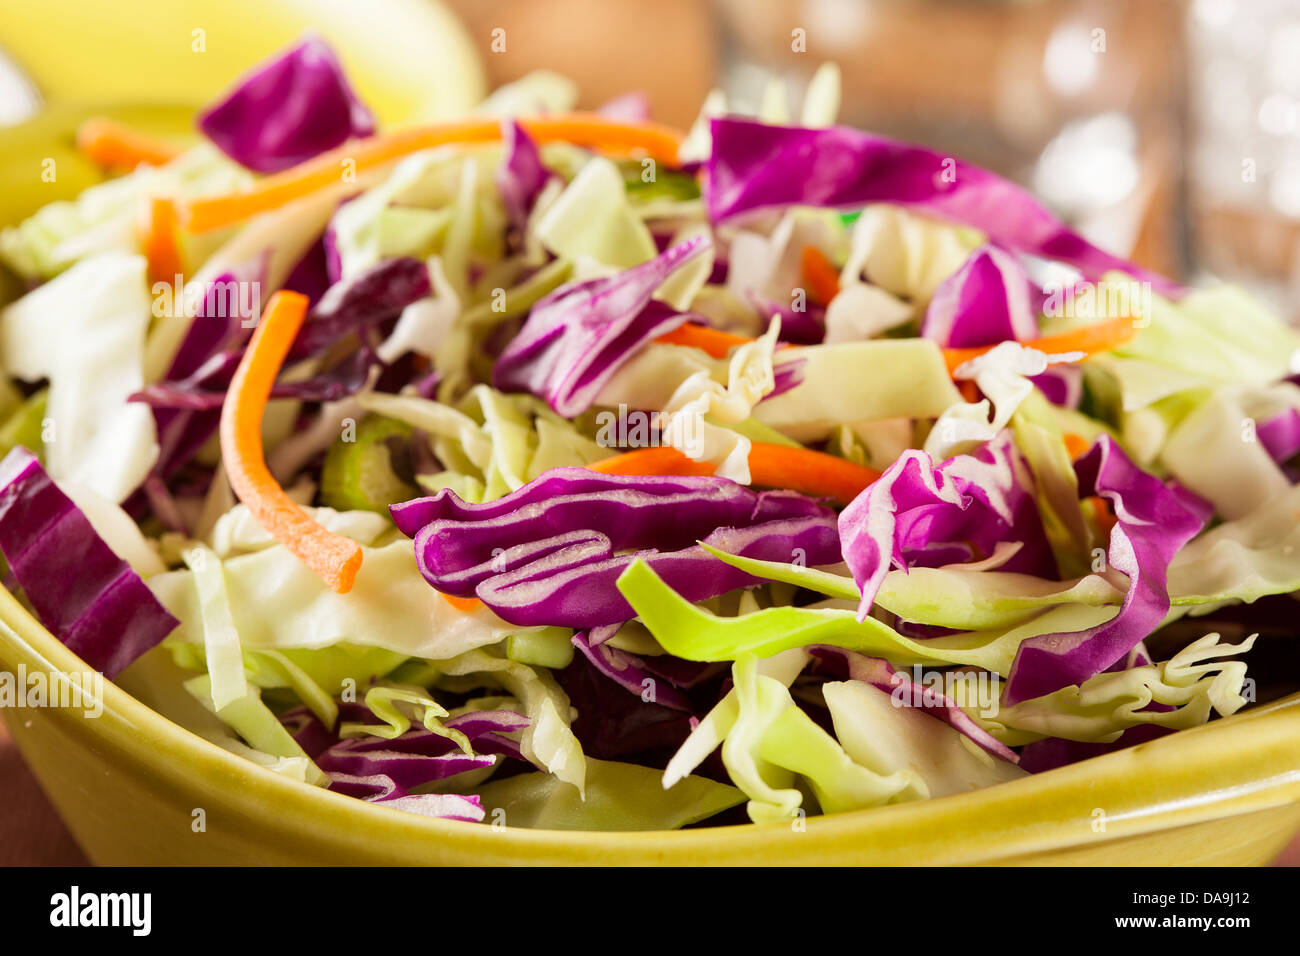 Homemade Coleslaw with Shredded Cabbage, Carrots, and Lettuce Stock Photo